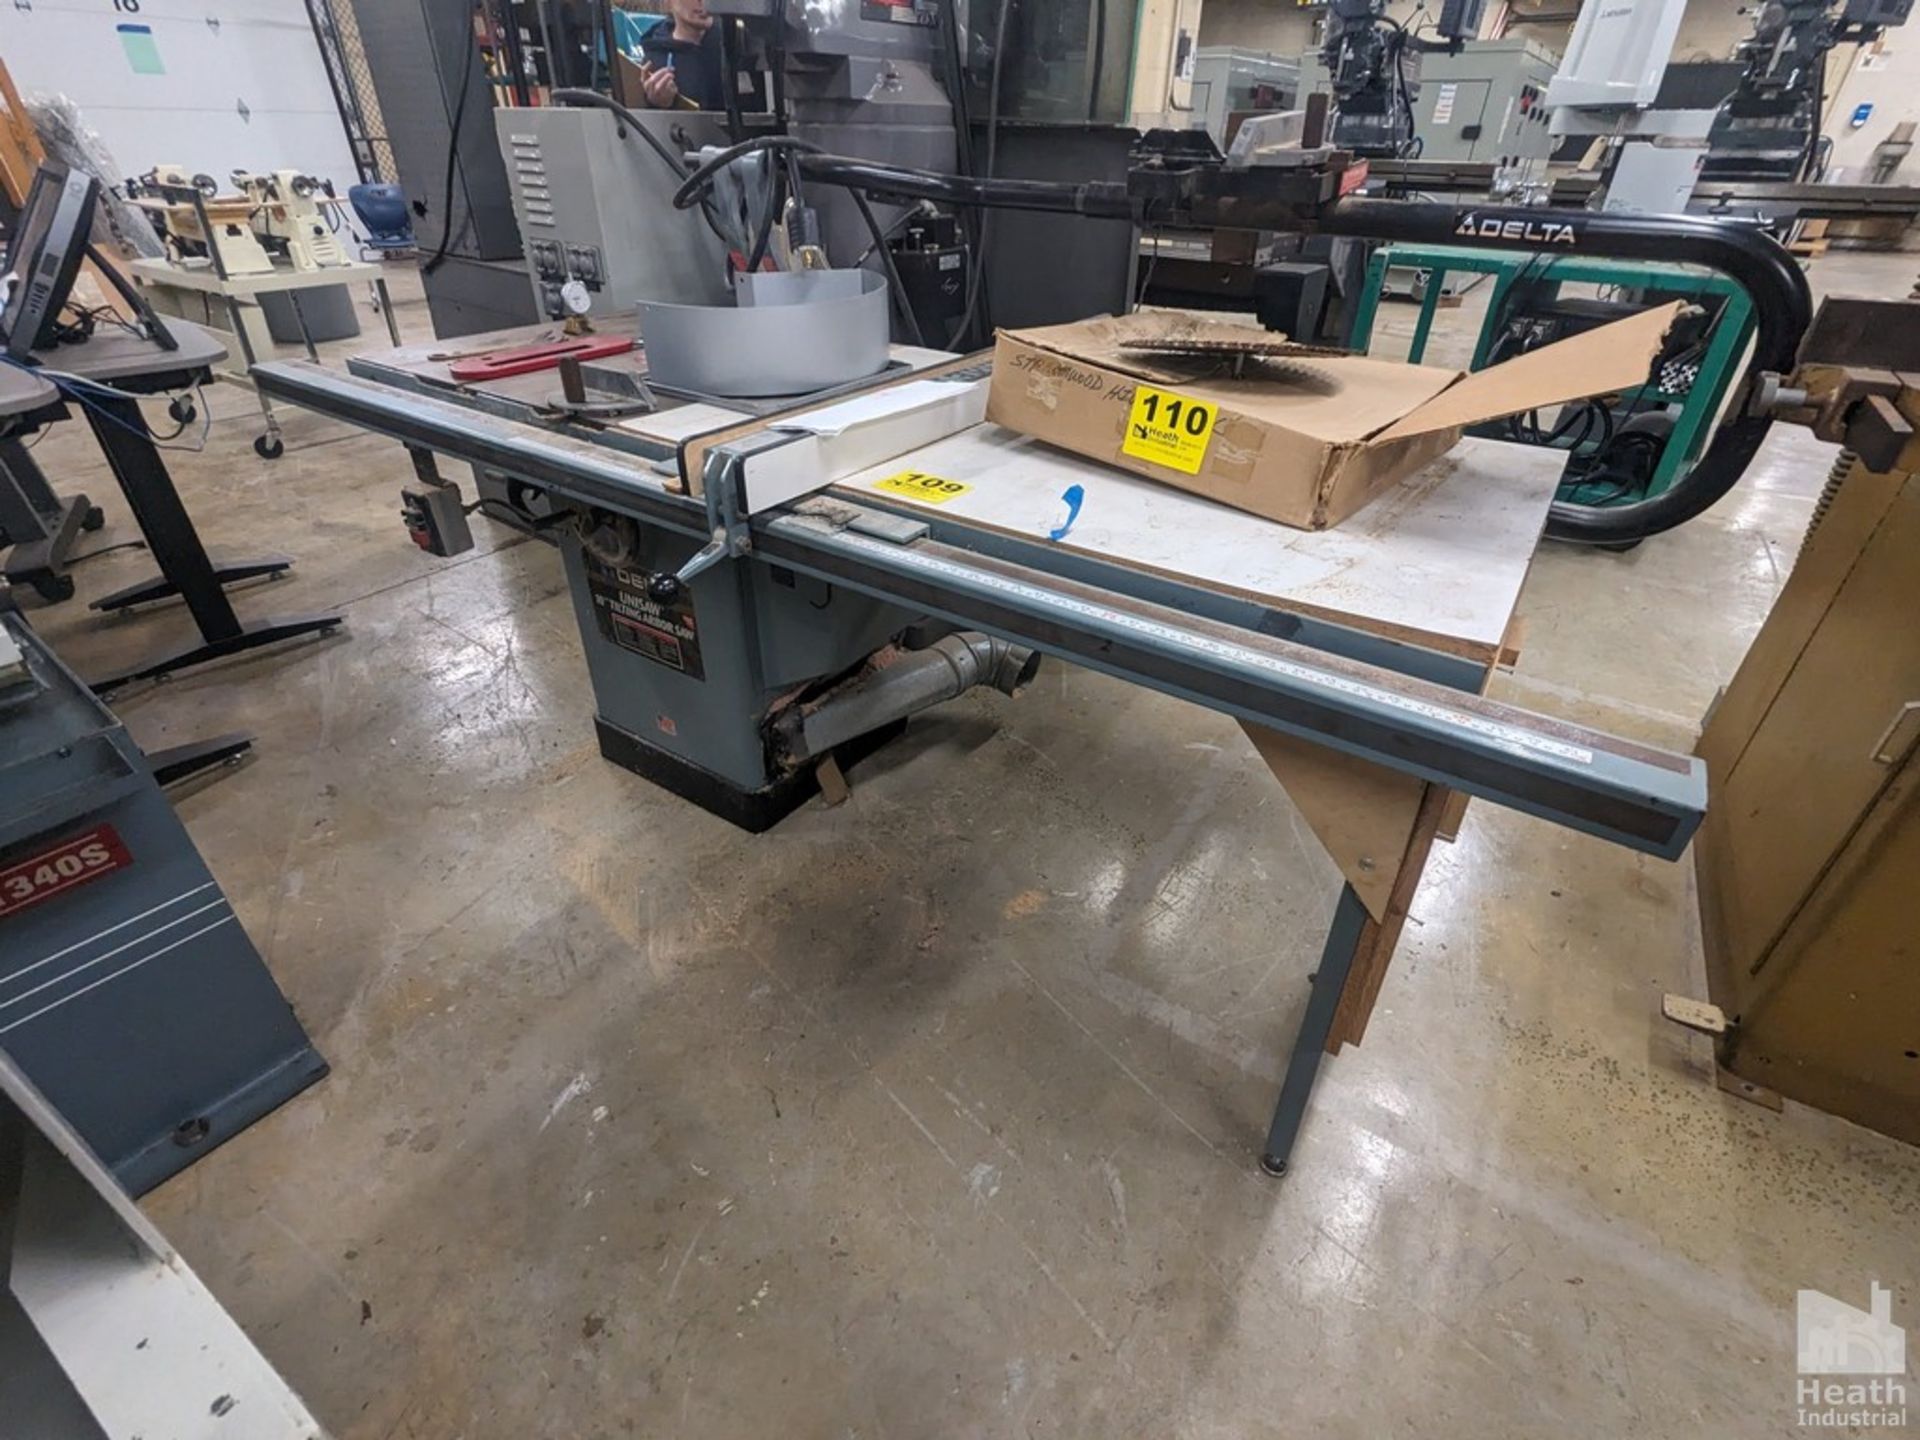 DELTA UNISAW 10" TILTING ARBOR TABLE SAW WITH EXTENDED TABLE BEISEMETER FENCE Loading Fee :$100